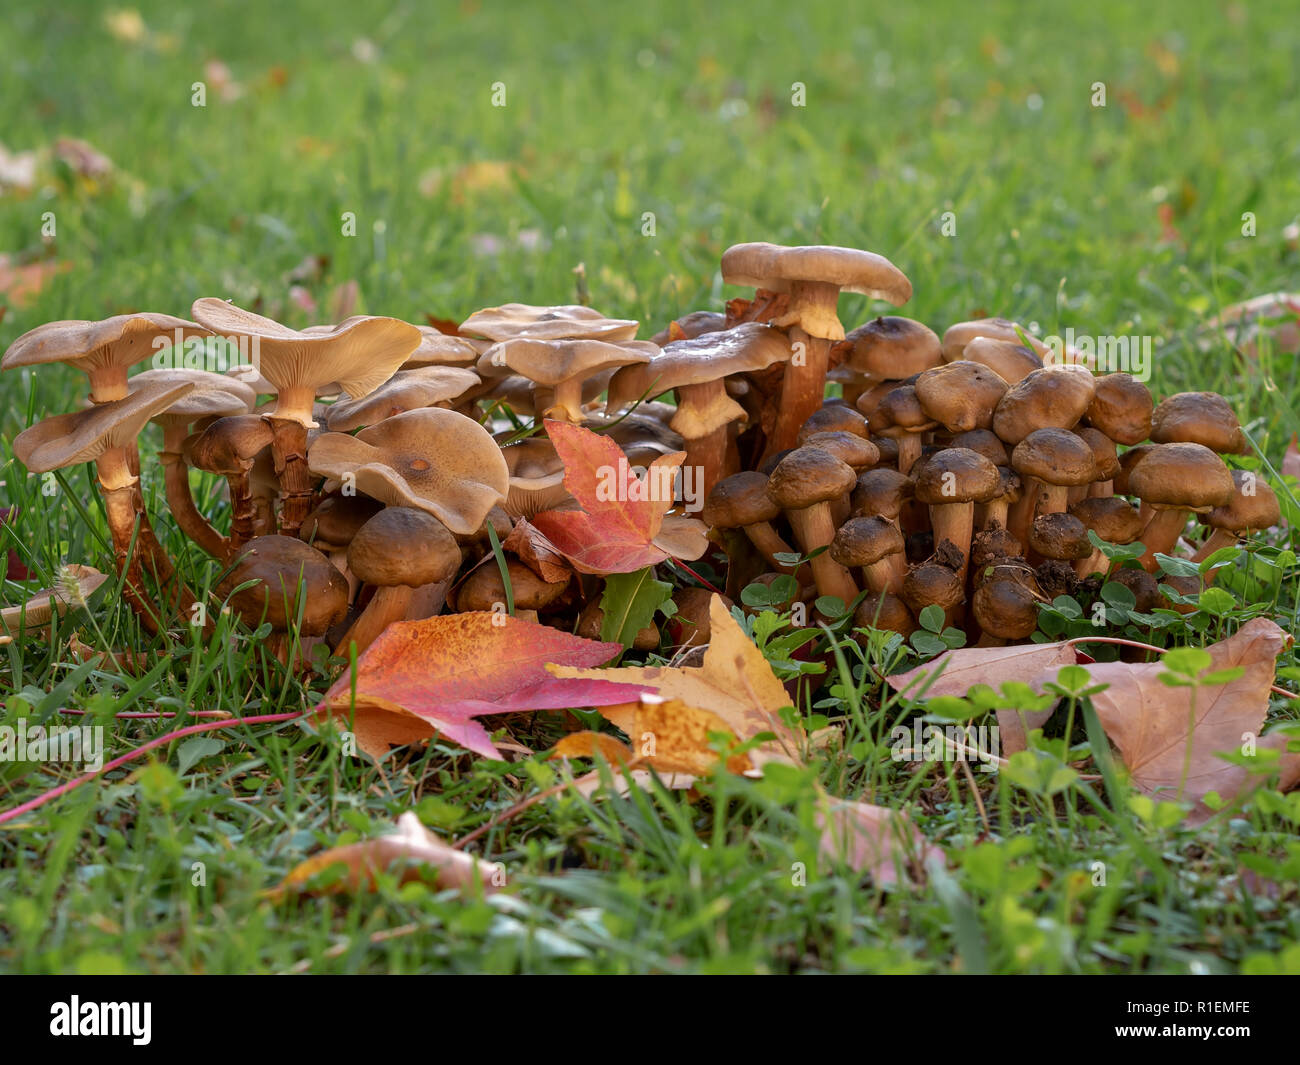 Armillaria mellea. Close up of wild Honey fungus mushrooms with autumn leaves and grass. Side view. Stock Photo